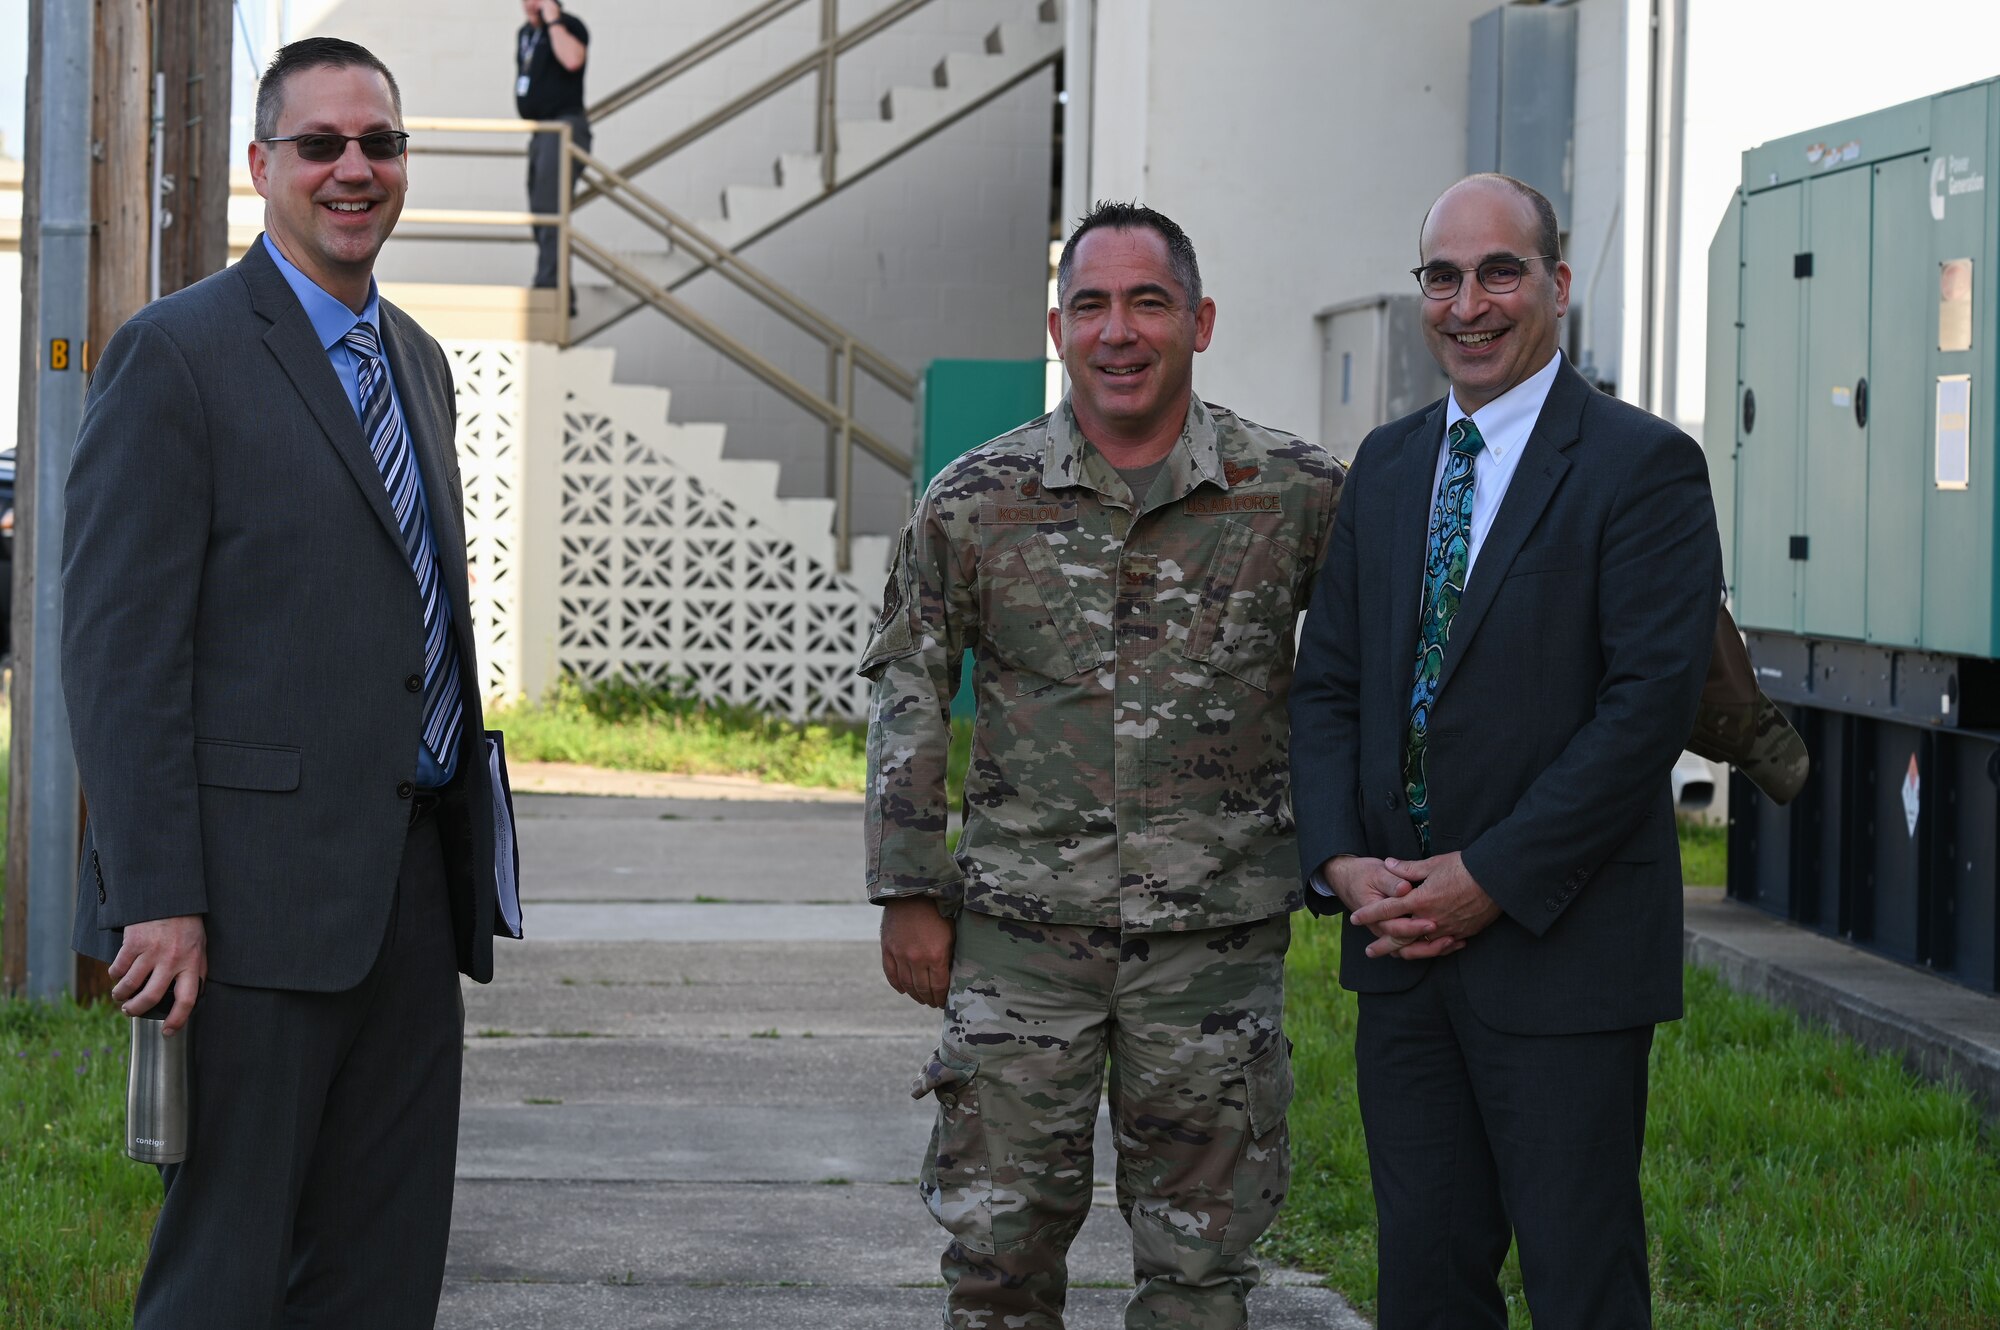 U.S. Air Force Col. Josh Koslov, 350th Spectrum Warfare Wing commander, center, John F. Vona, Air Combat Command deputy director of the plans, program and requirements directorate, right, and Dr. John D. Matyjas, ACC chief scientist, left, pose for a photo at Eglin Air Force Base, Fla., April 11, 2023. The 350th SWW serves as the Air Force’s first EMS focused wing on enhancing air component commanders’ ability to synchronize, integrate and execute EMS capabilities across all domains and platforms. (U.S. Air Force photo by Staff Sgt. Ericka A. Woolever)